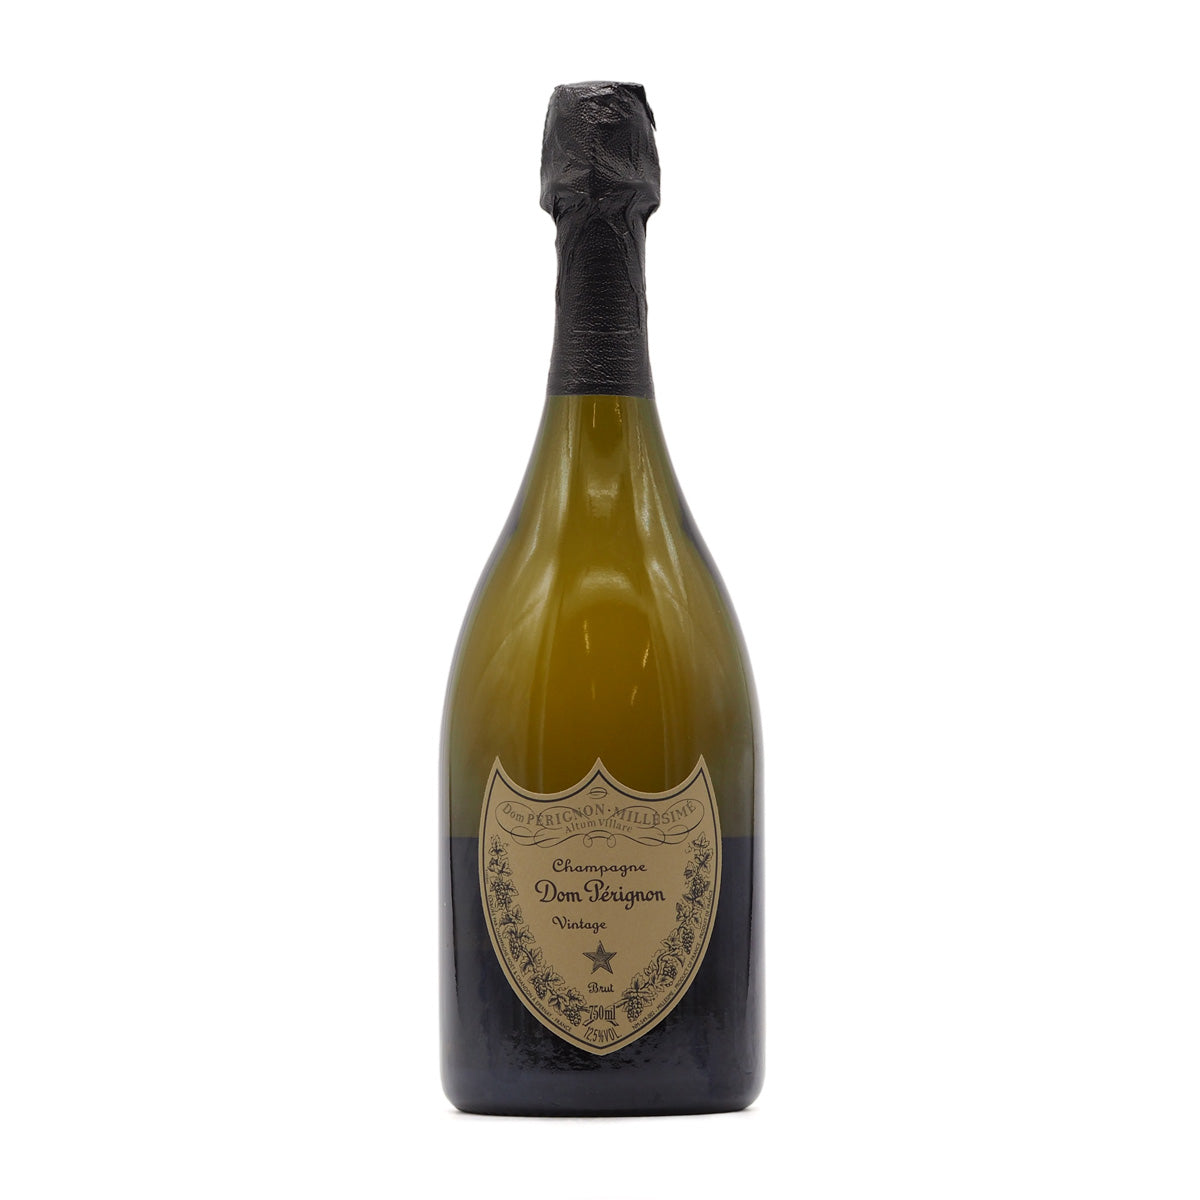 Dom Perignon Vintage 2013, 750ml French champagne, from Epernay, Champagne, France – GDV Fine Wines, Hong Kong